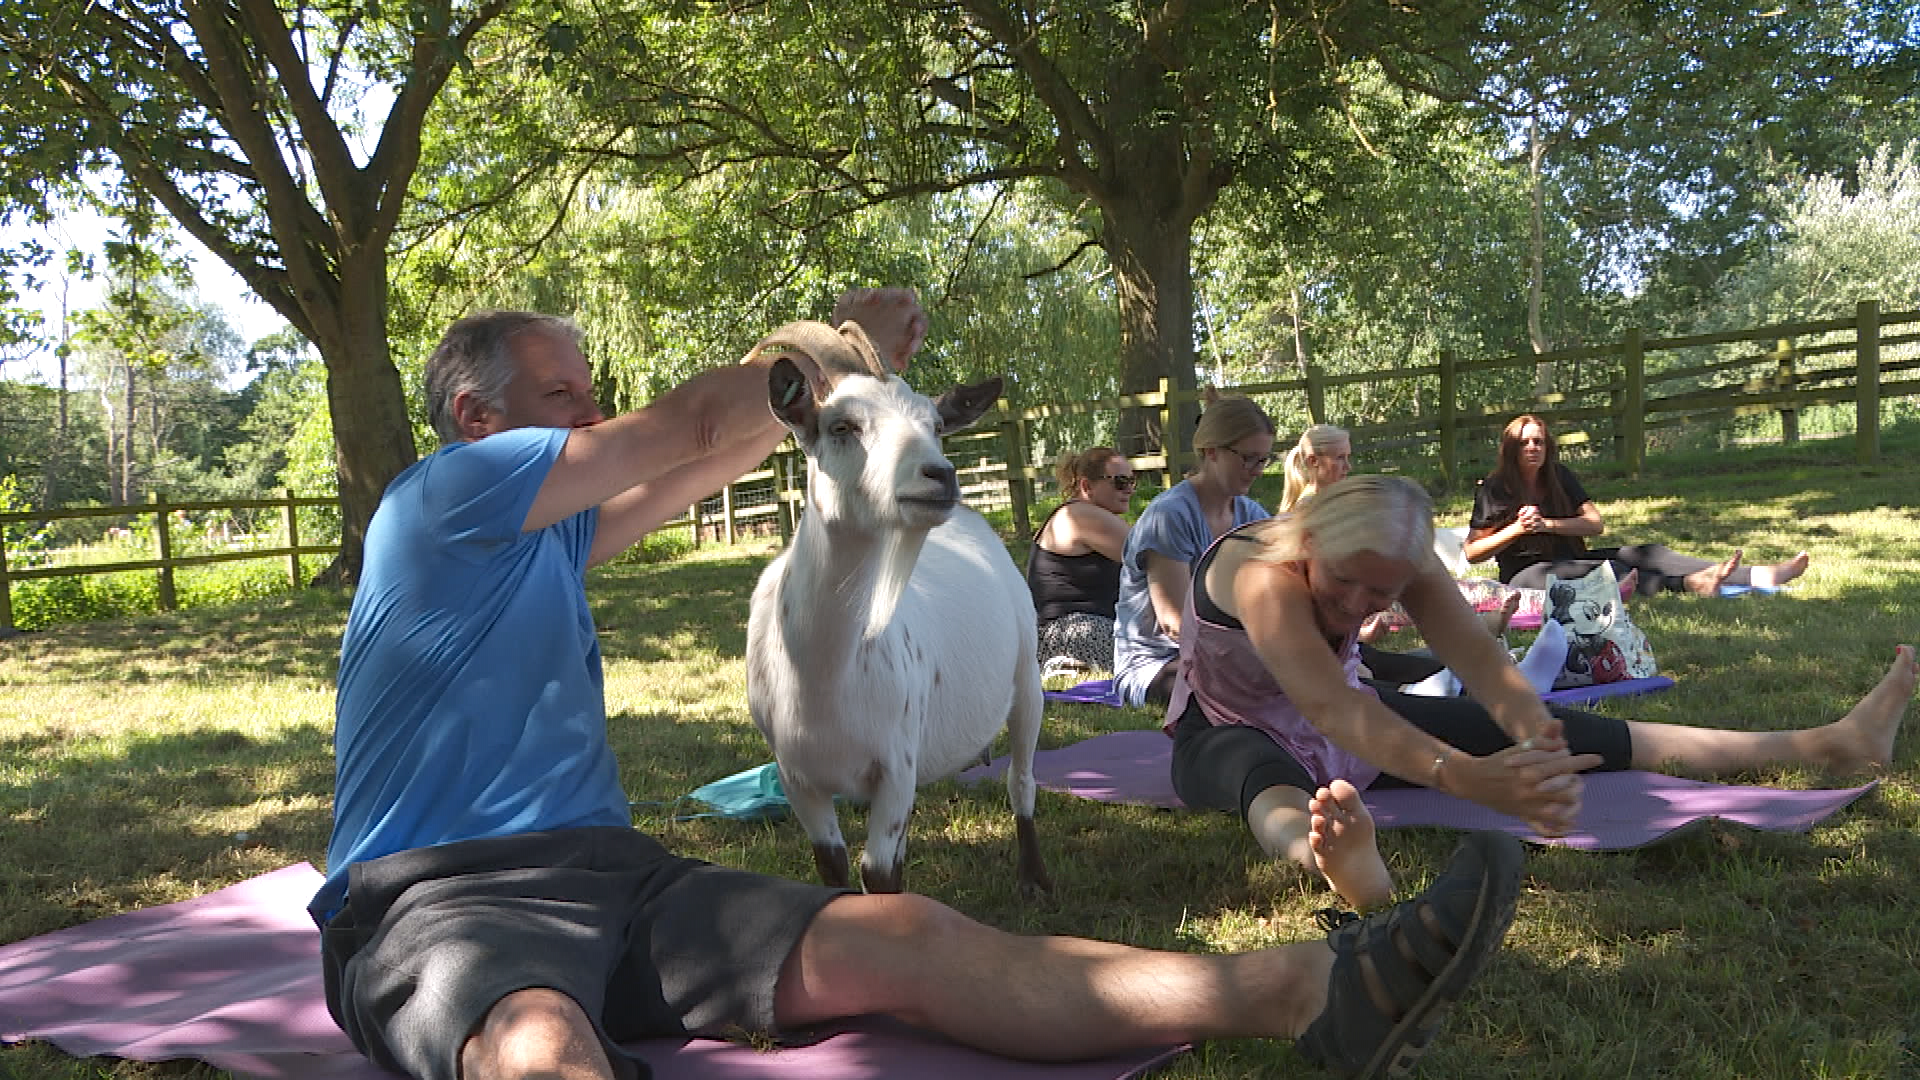 Goat yoga craze growing in popularity - Latest From ITV News